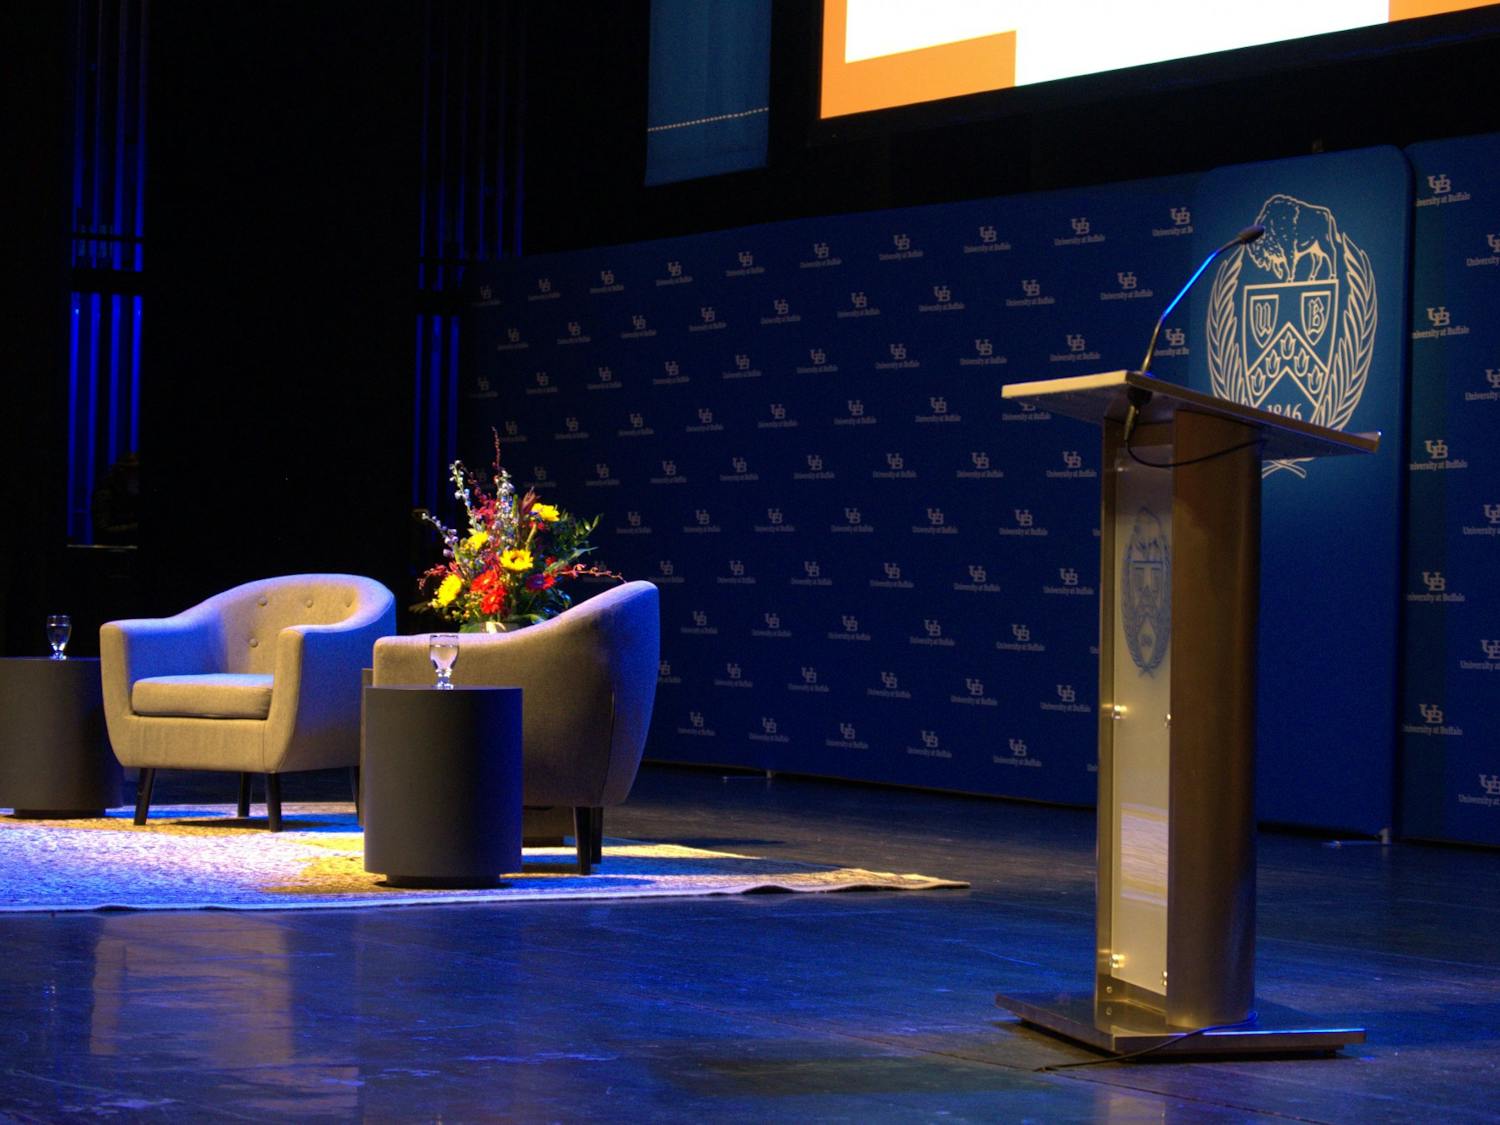 The University at Buffalo Foundation declined to disclose how much they spent on this year’s Distinguished Speakers Series. &nbsp;